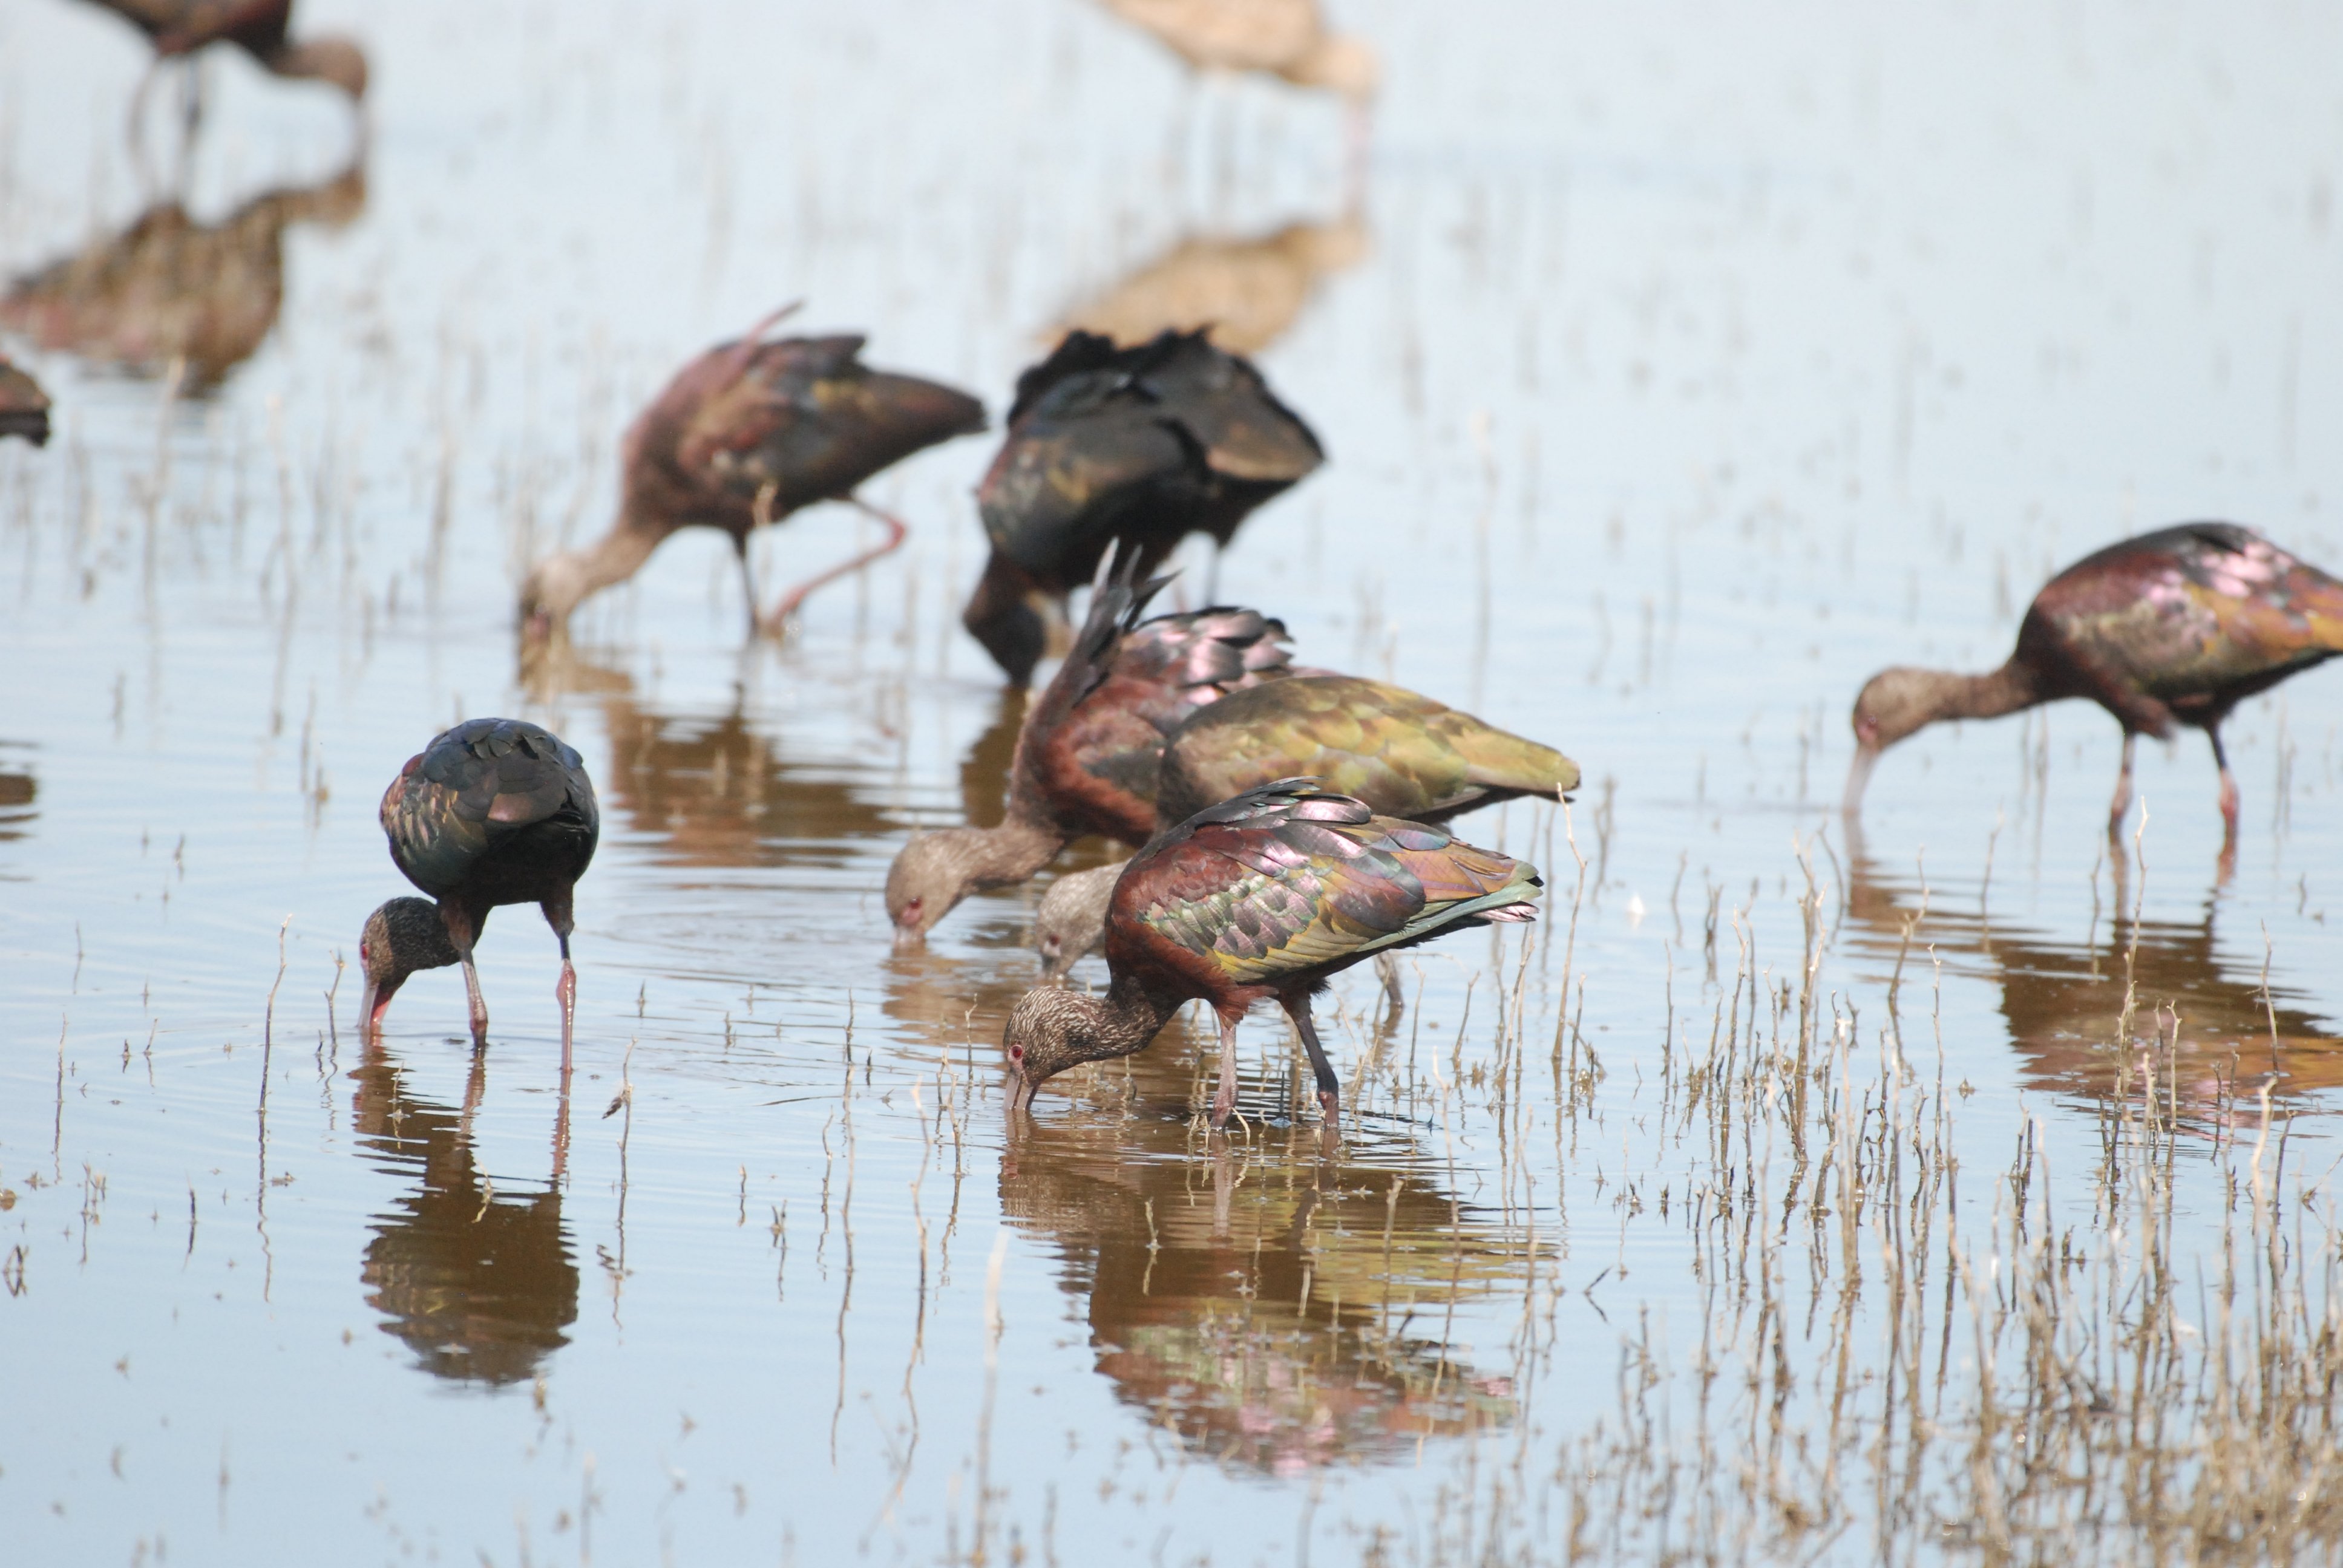 A group of long-legged birds with iridescent purple and copper-colored feathers feed while standing in shallow water. 